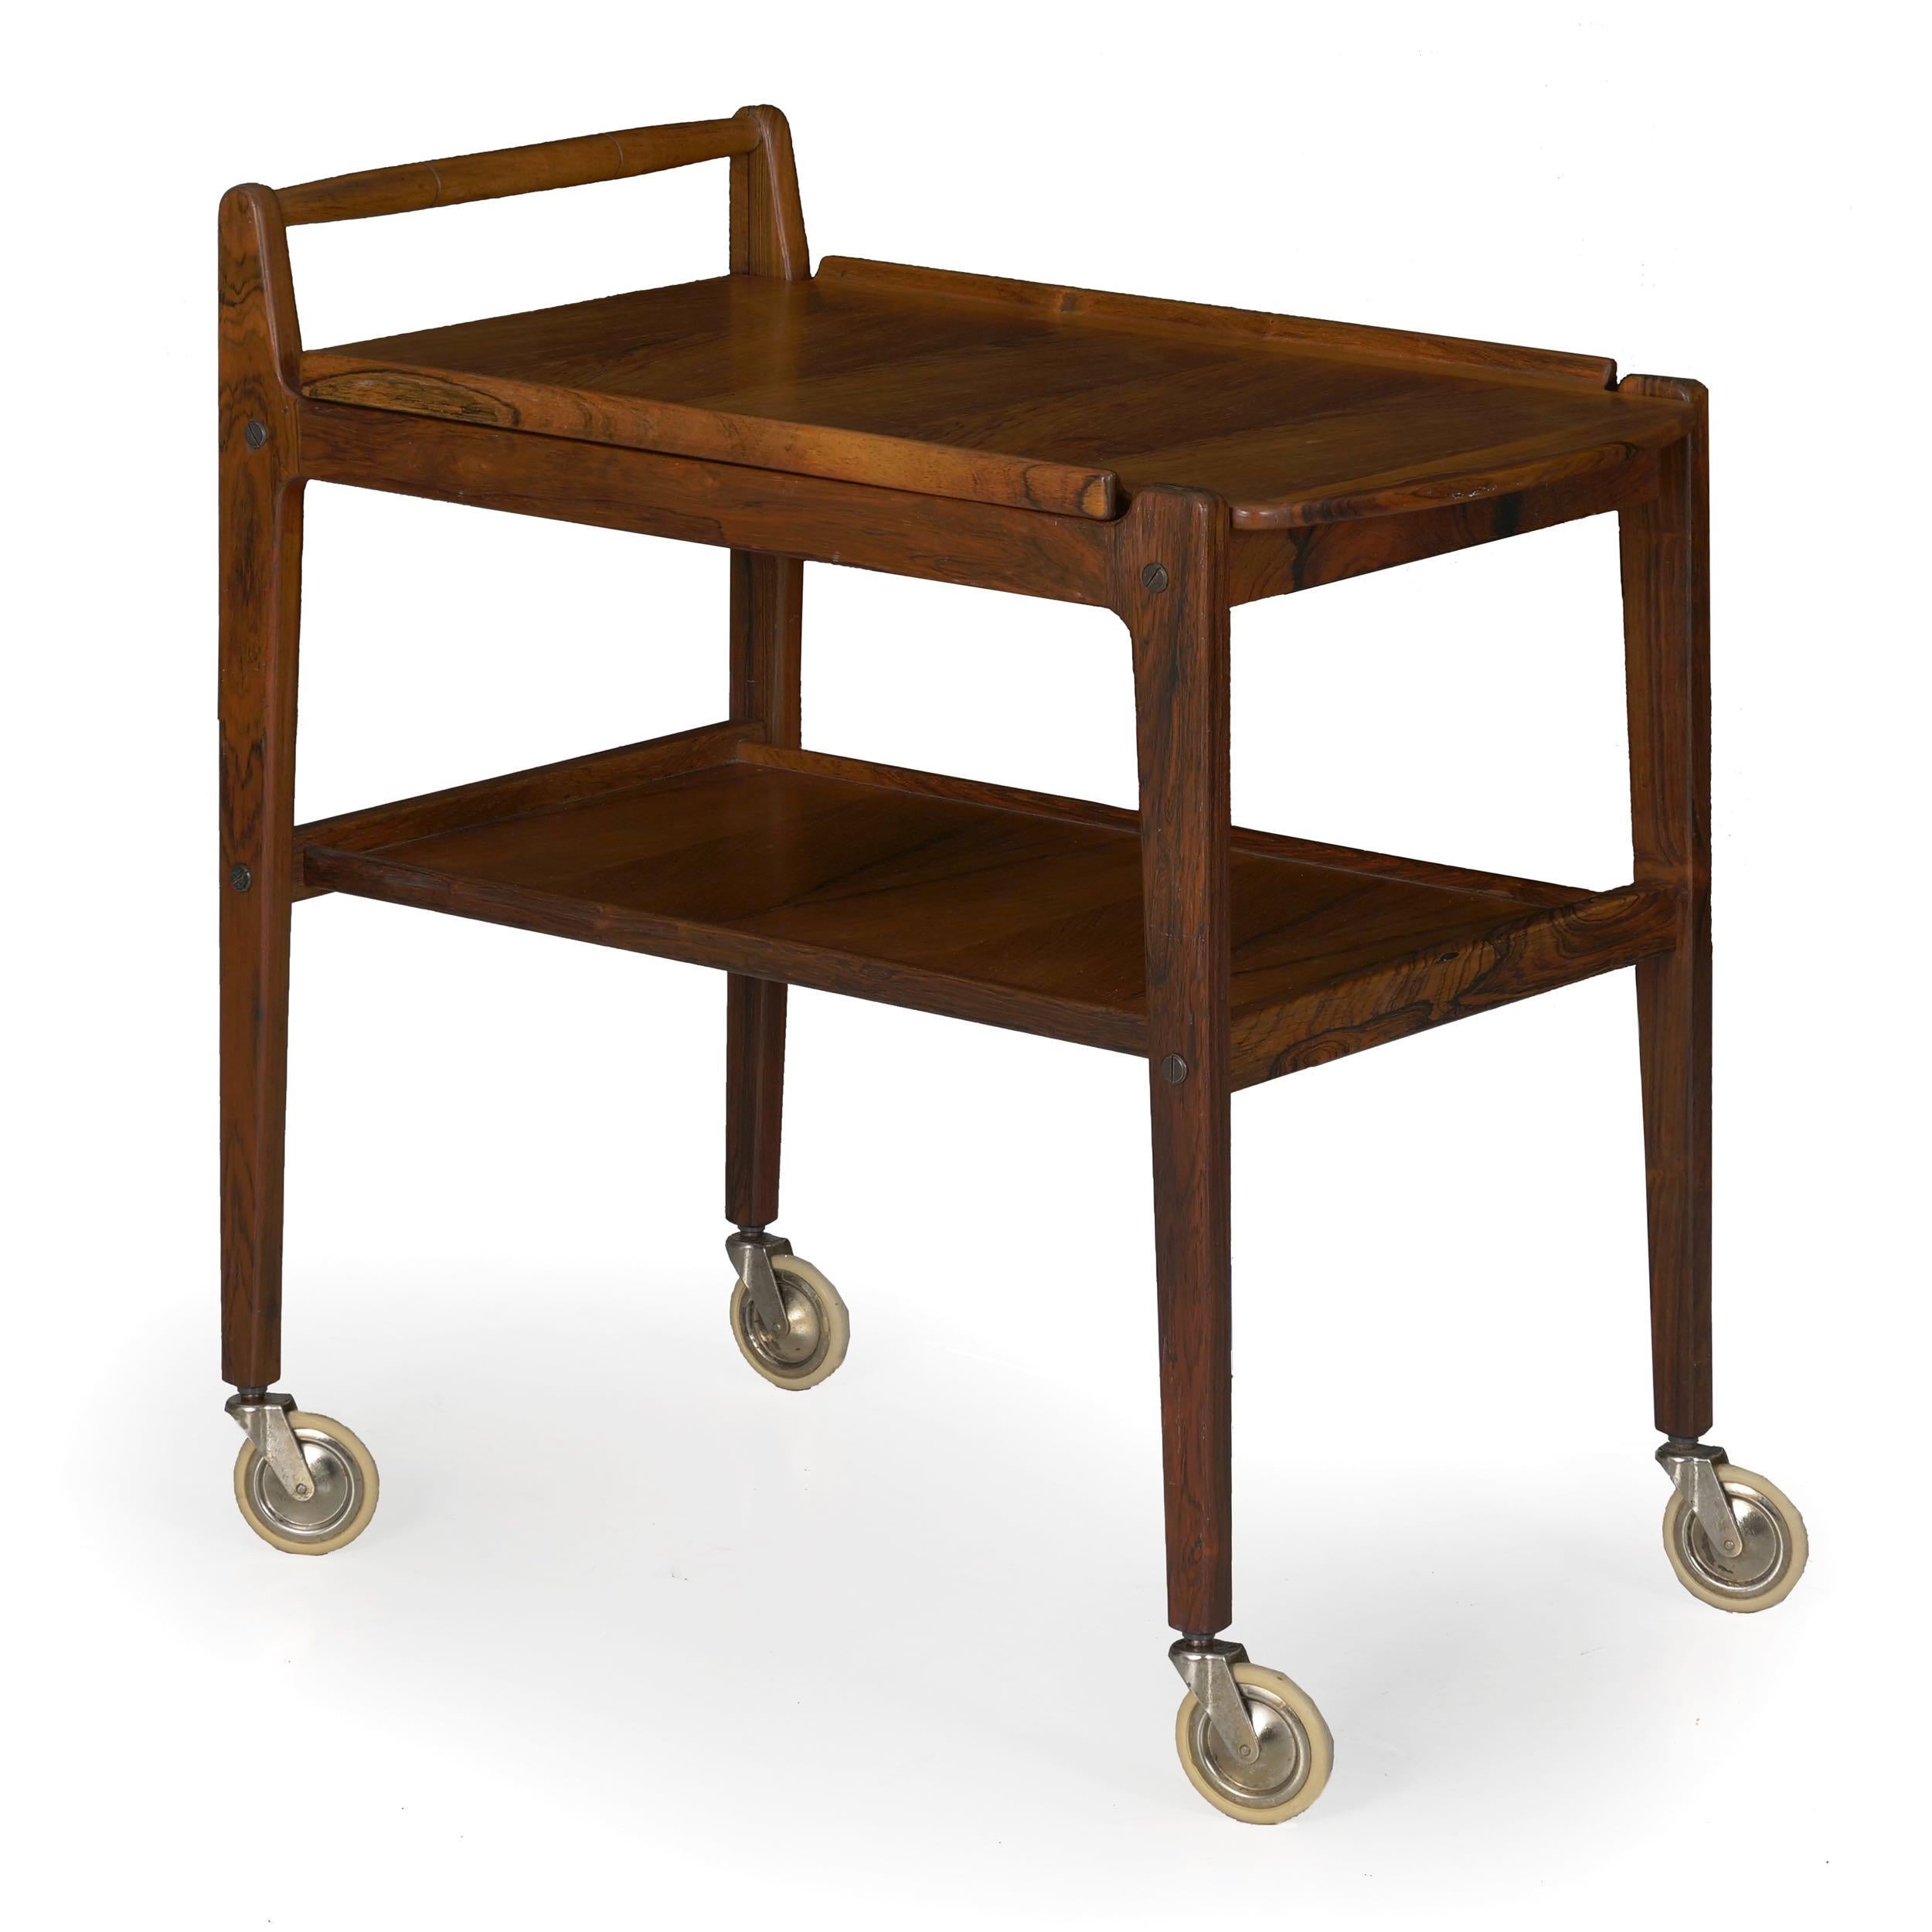 A gorgeous midcentury bar cart designed by Erik Gustafsson and manufactured in Sweden, it is crafted in rosewood solid and veneers. The tray top has a nice molded edge and is removable, convenient for serving food to the living areas. It rolls over